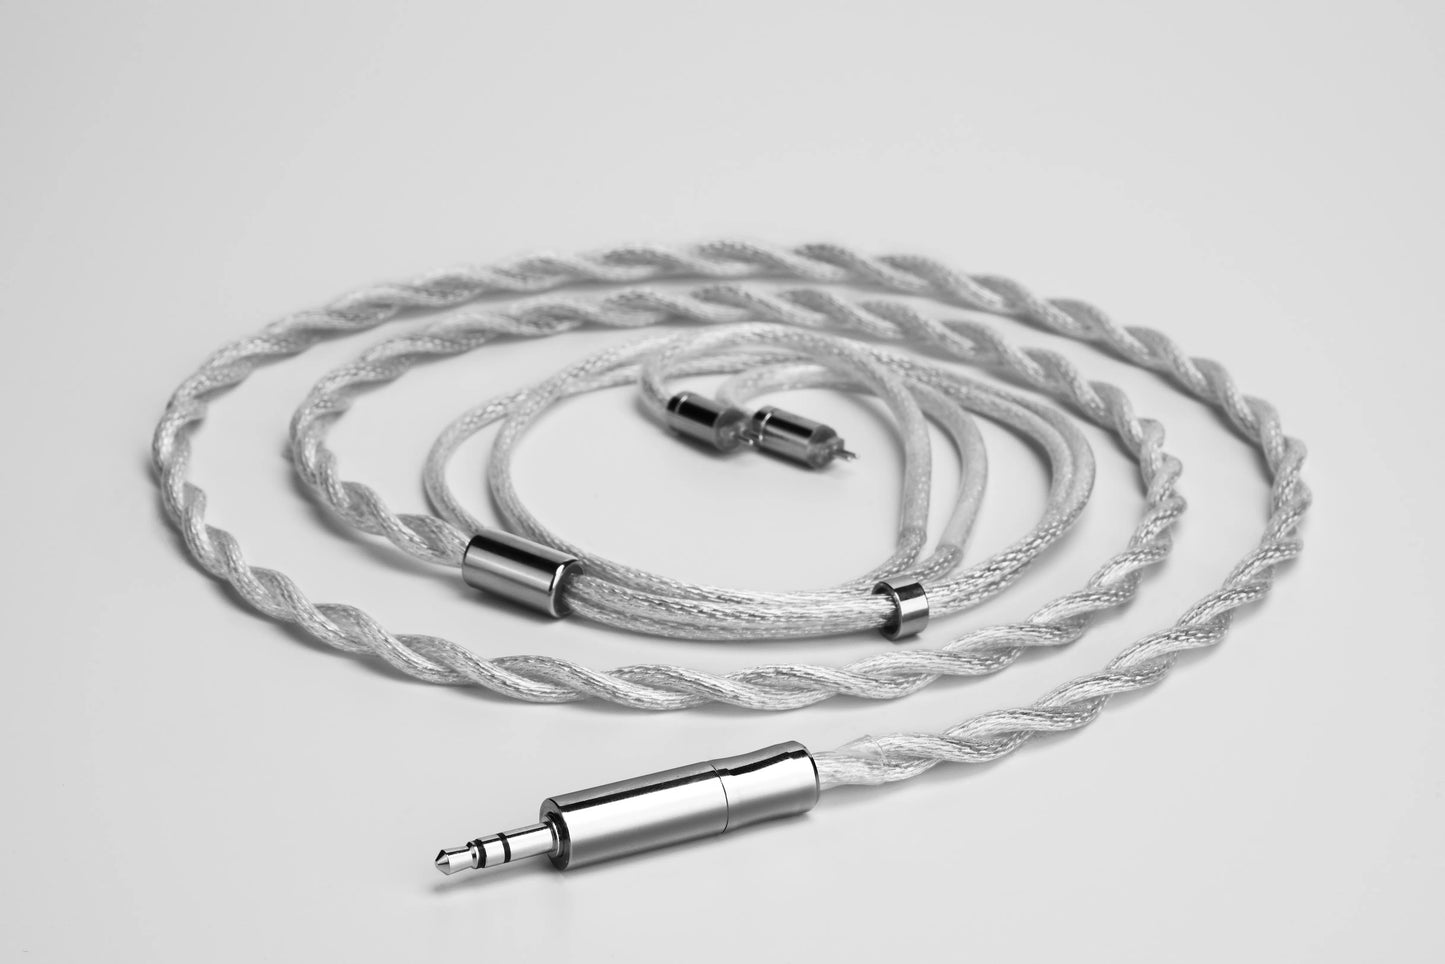 SIMGOT LC7 OFC Silver Plated IEM Upgrade Cable - The HiFi Cat